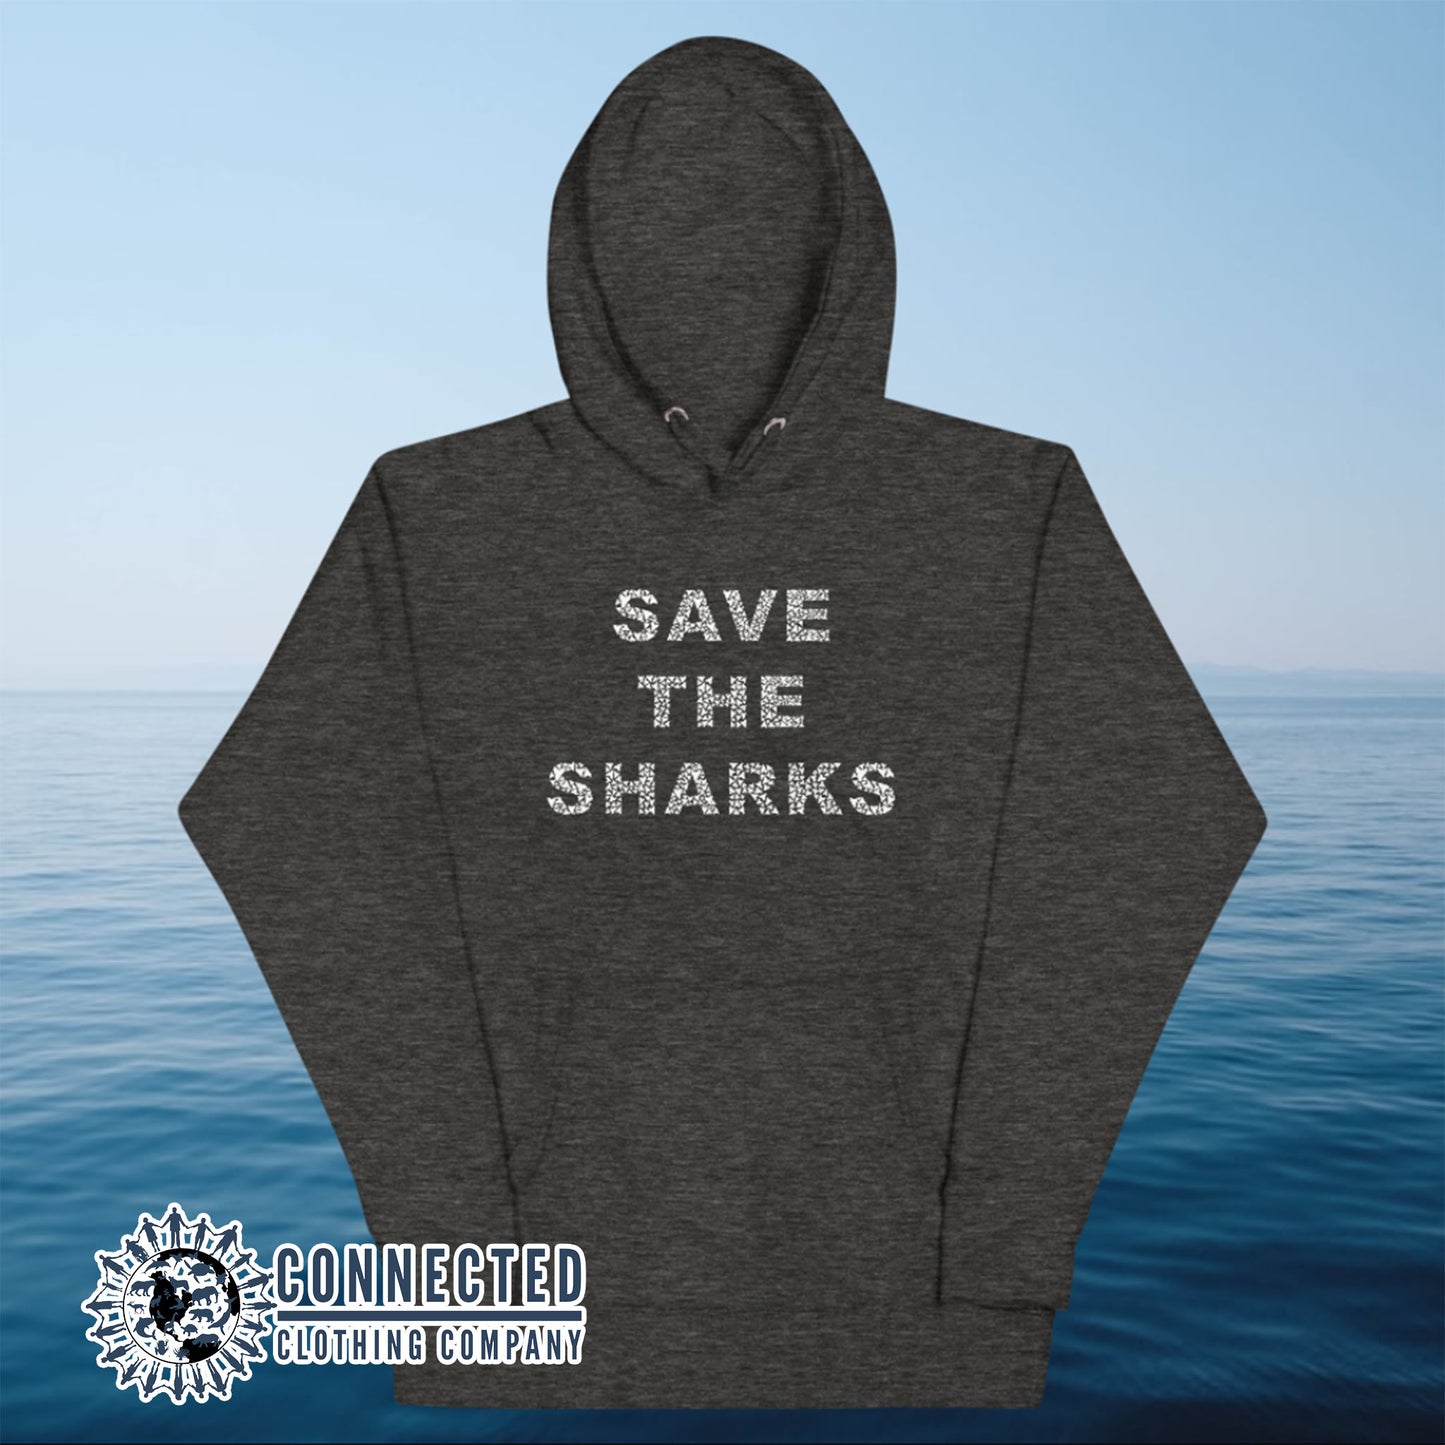 Charcoal Save The Sharks Unisex Hoodie - Connected Clothing Company - Ethically and Sustainably Made - 10% donated to Oceana shark conservation